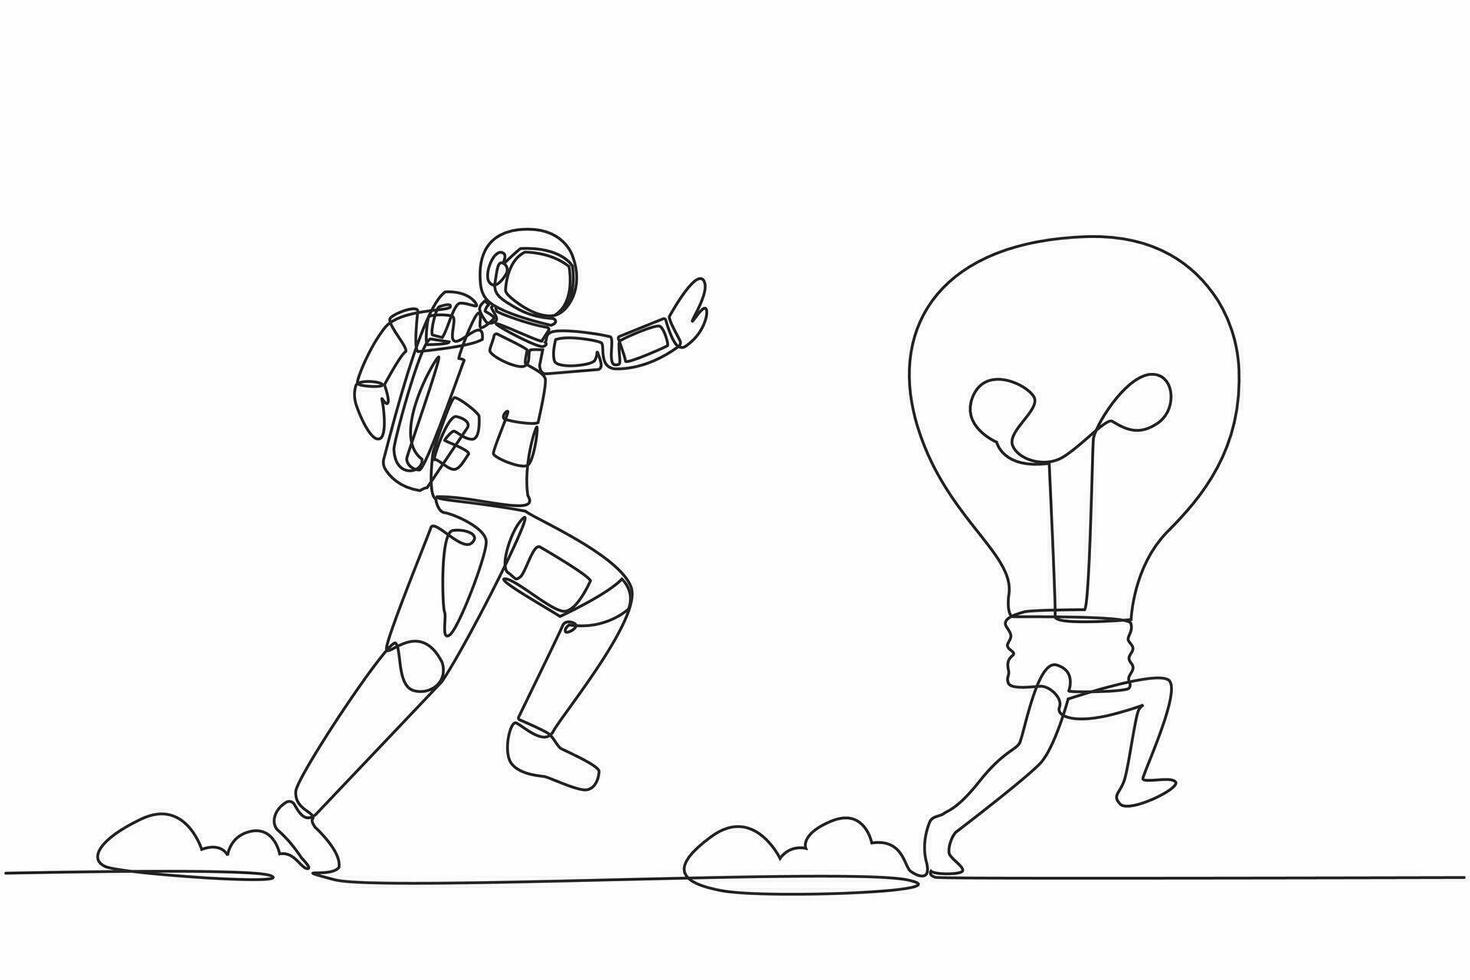 Single continuous line drawing of young astronaut chasing light bulb in moon surface. Innovation in the discovery of new planets. Cosmic galaxy space. One line draw graphic design vector illustration